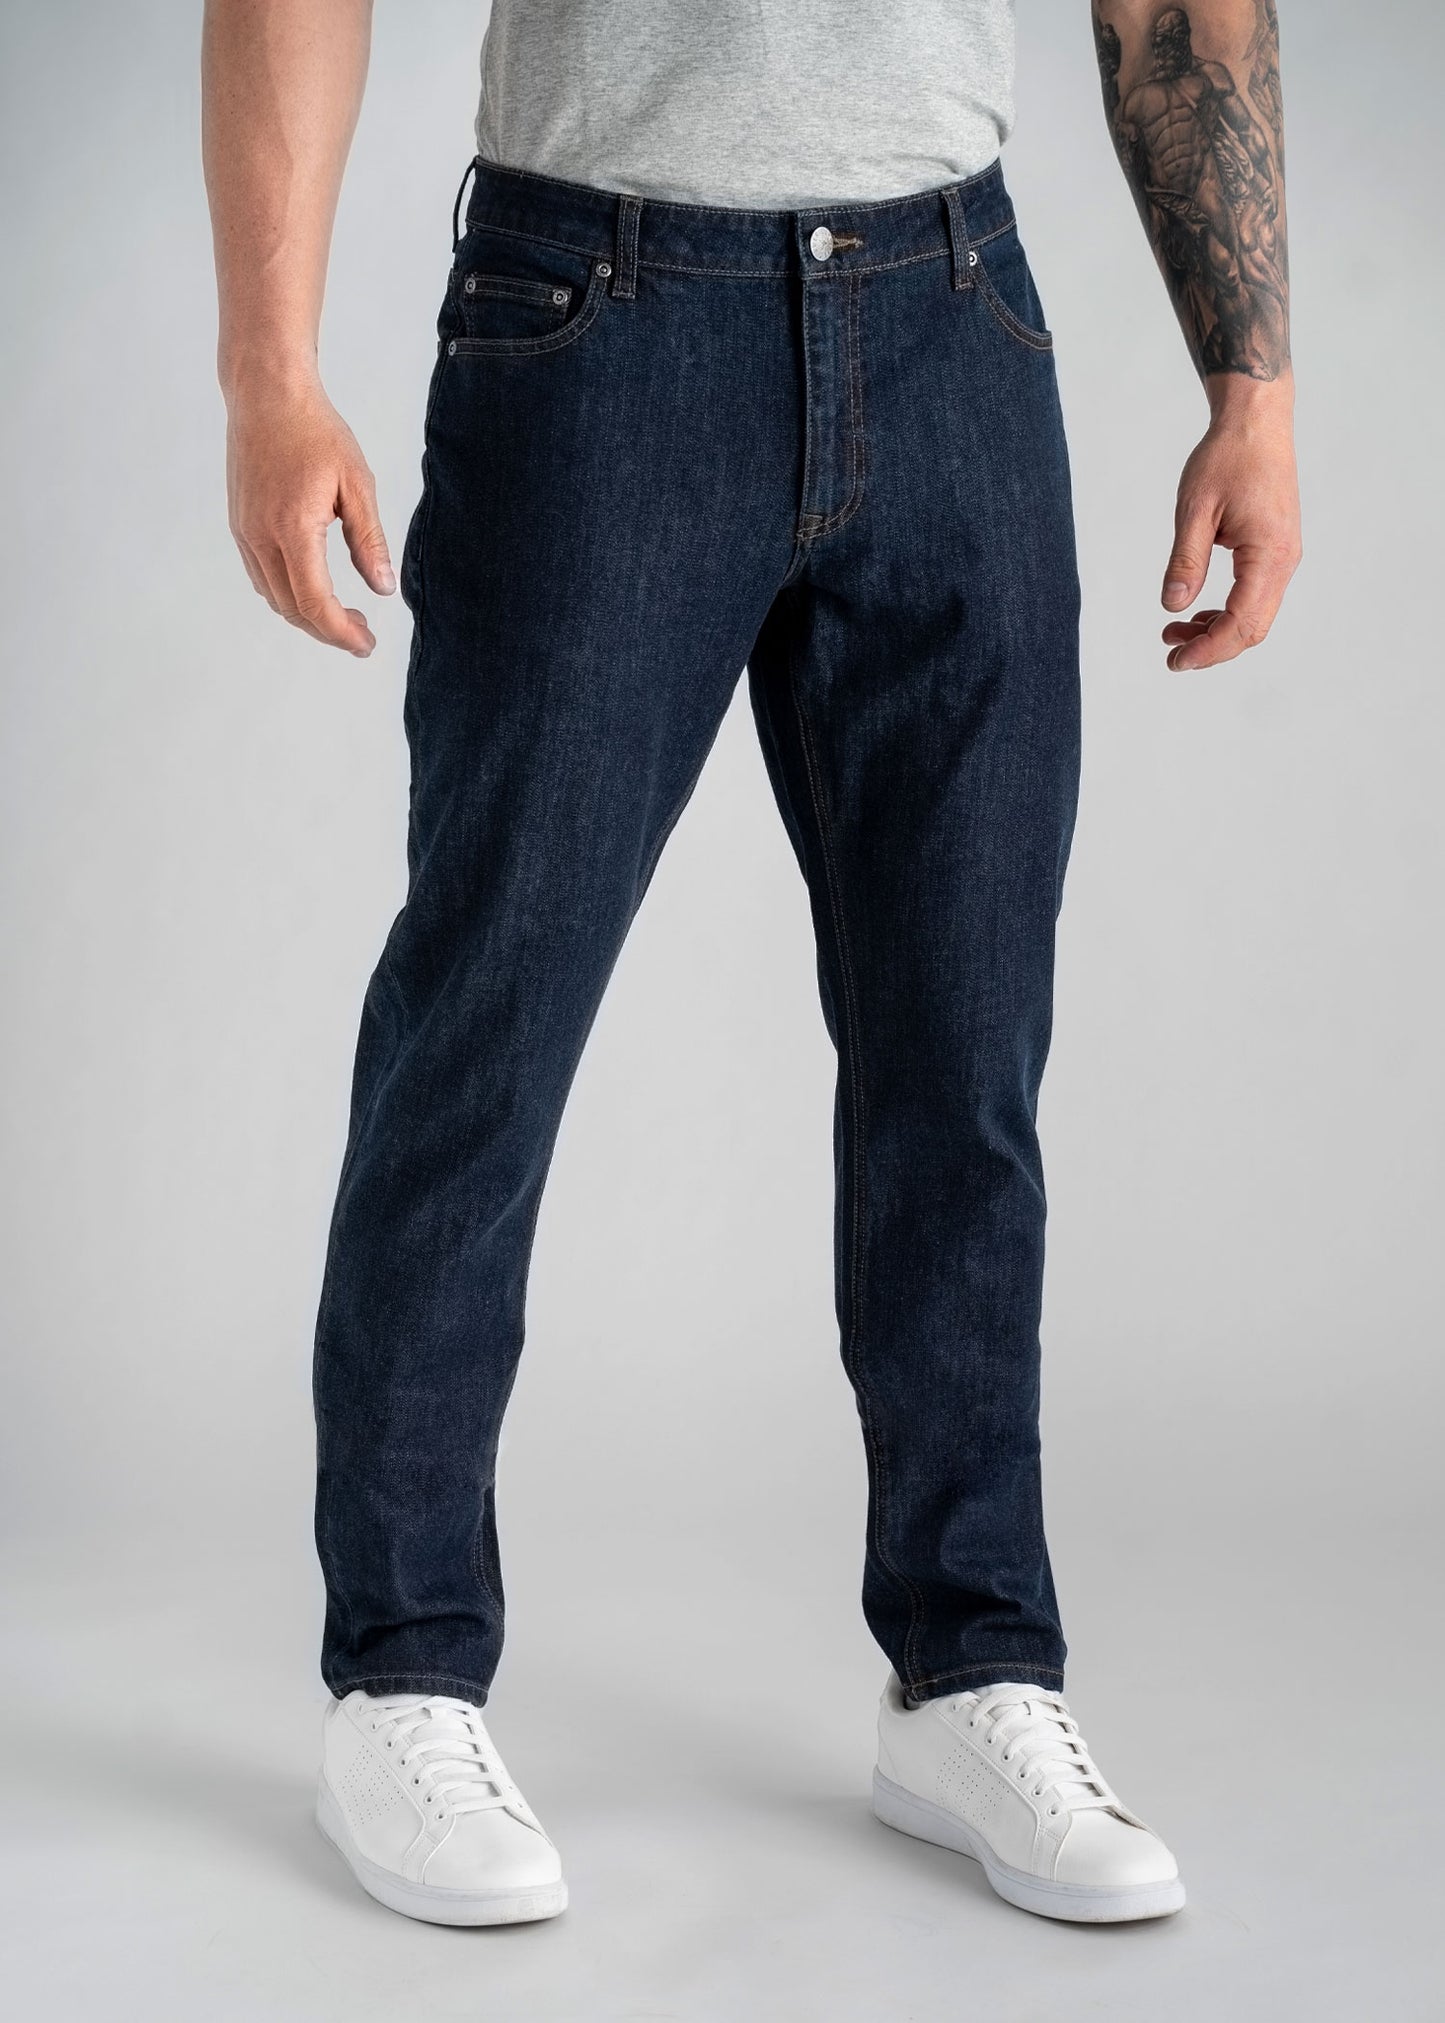 Carman Tapered Jeans for Tall Men | American Tall